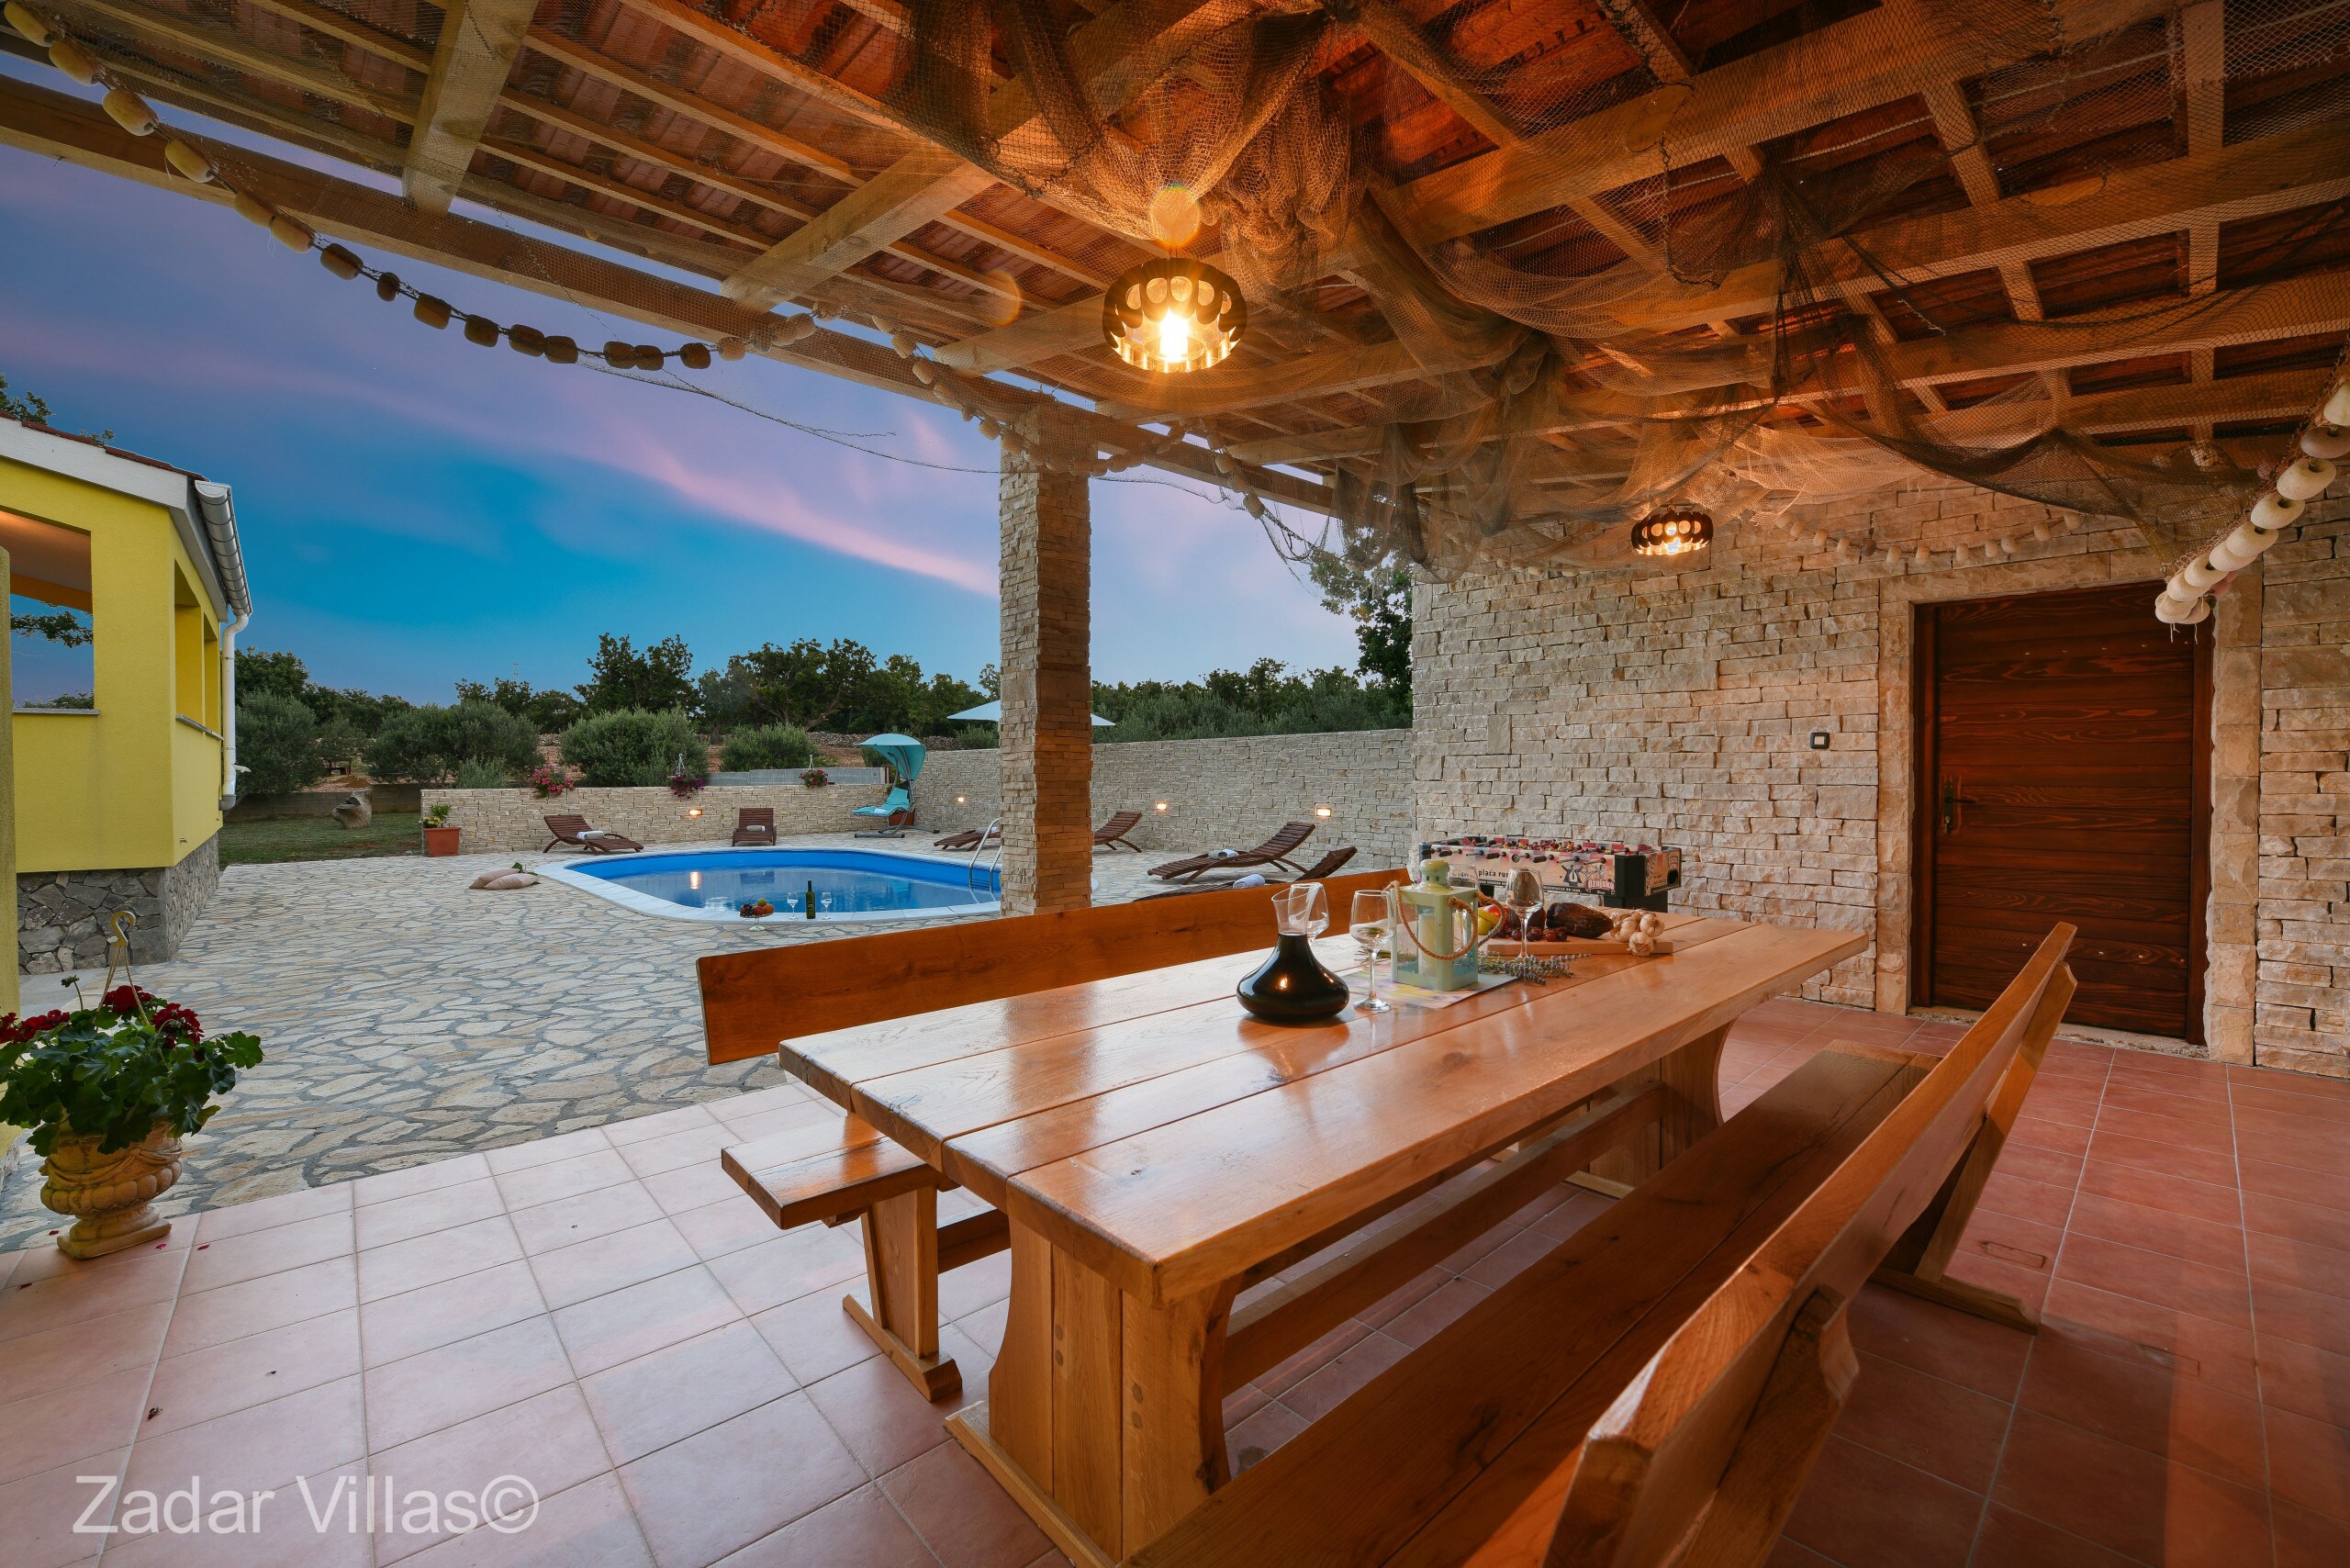 Property Image 1 - Dazzling Stone Villa with Pool Table near the Sea